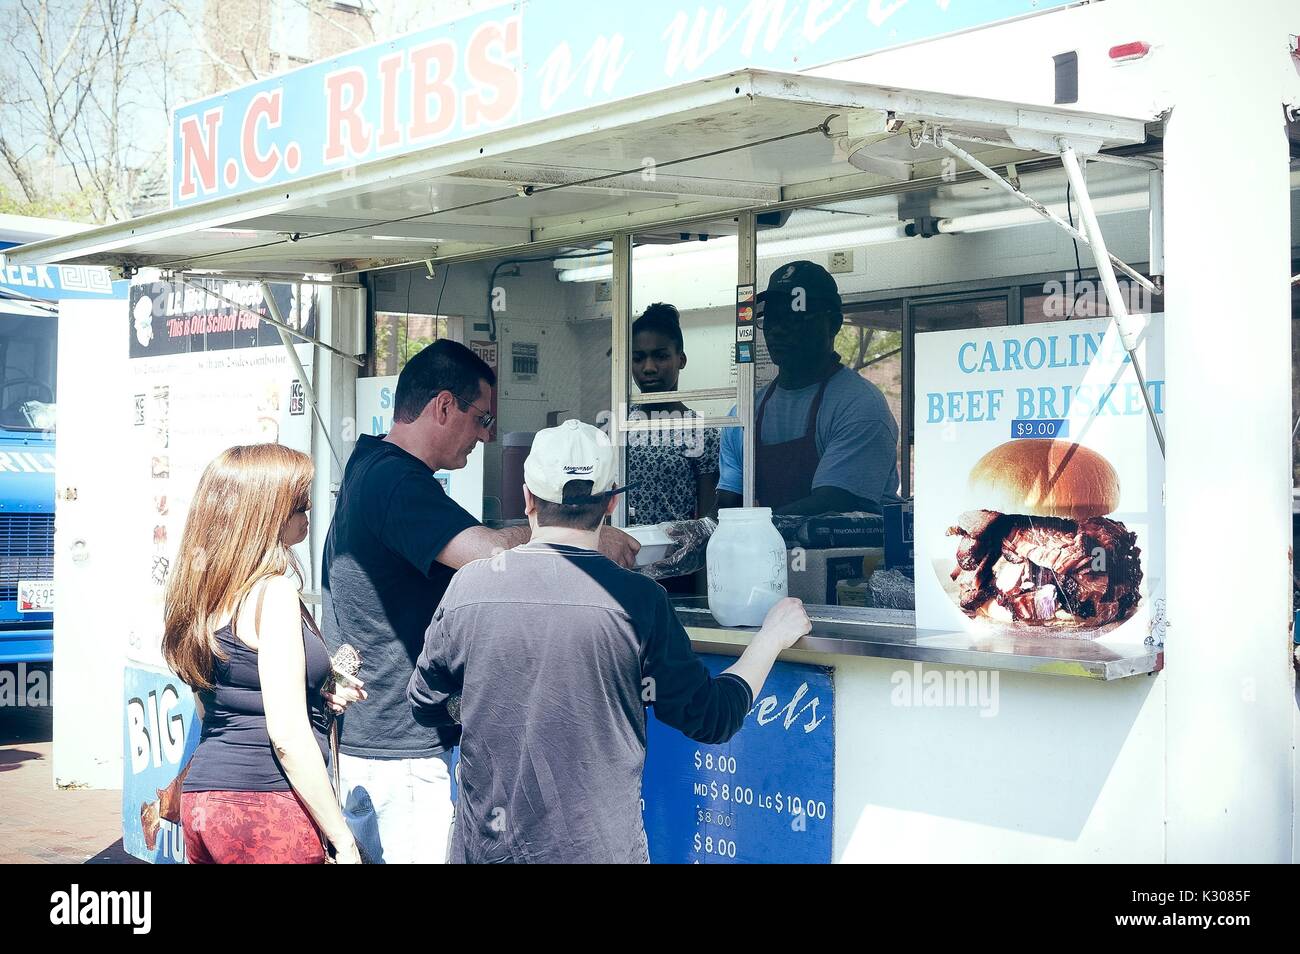 A woman and two men stand together ordering from a 'NC Ribs' food truck during Spring Fair, a student-run spring carnival at Johns Hopkins University, Baltimore, Maryland, April, 2016. Courtesy Eric Chen. Stock Photo